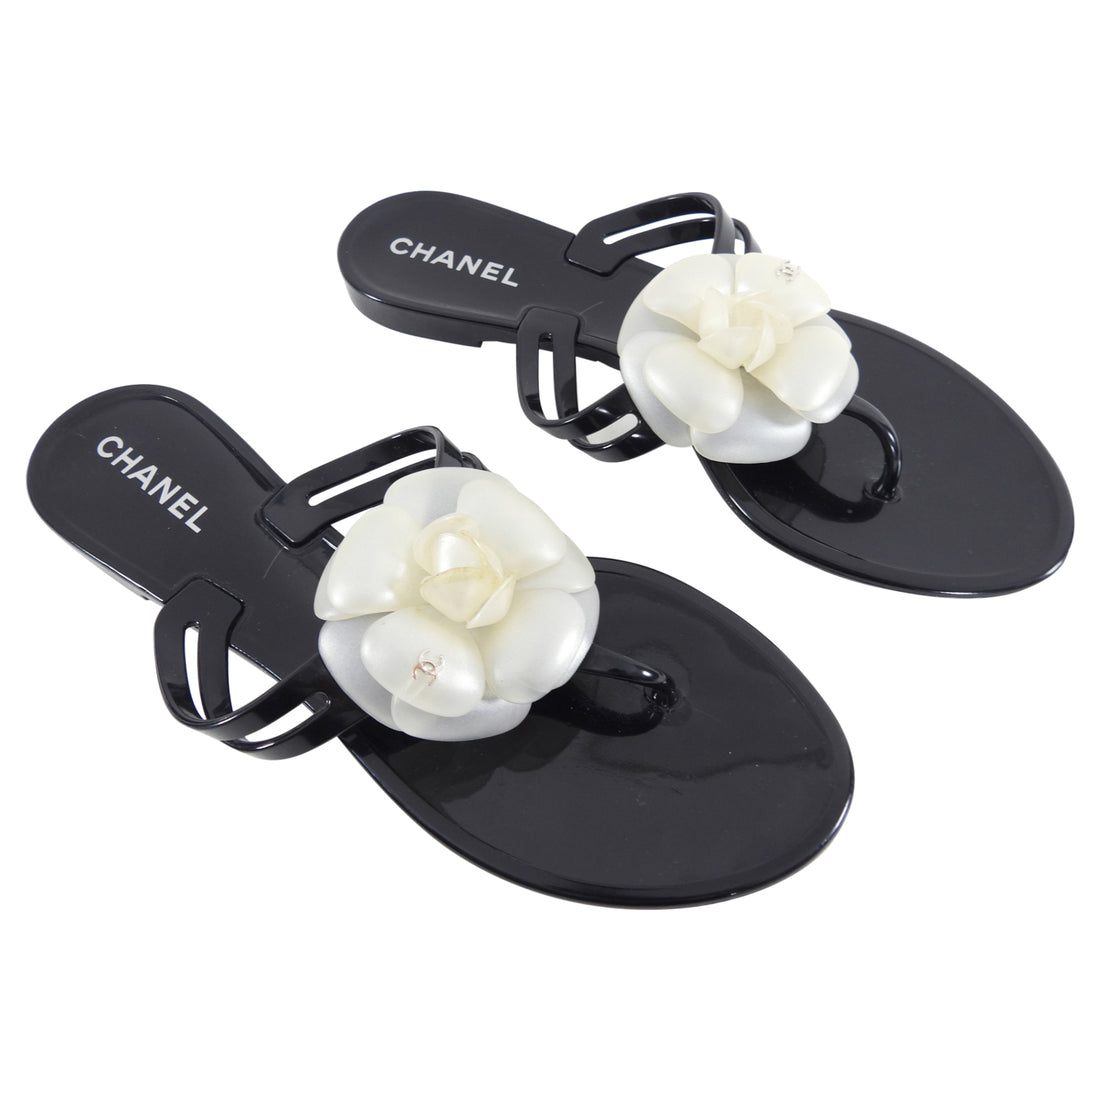 21 Best Chanel Jelly Sandals ideas